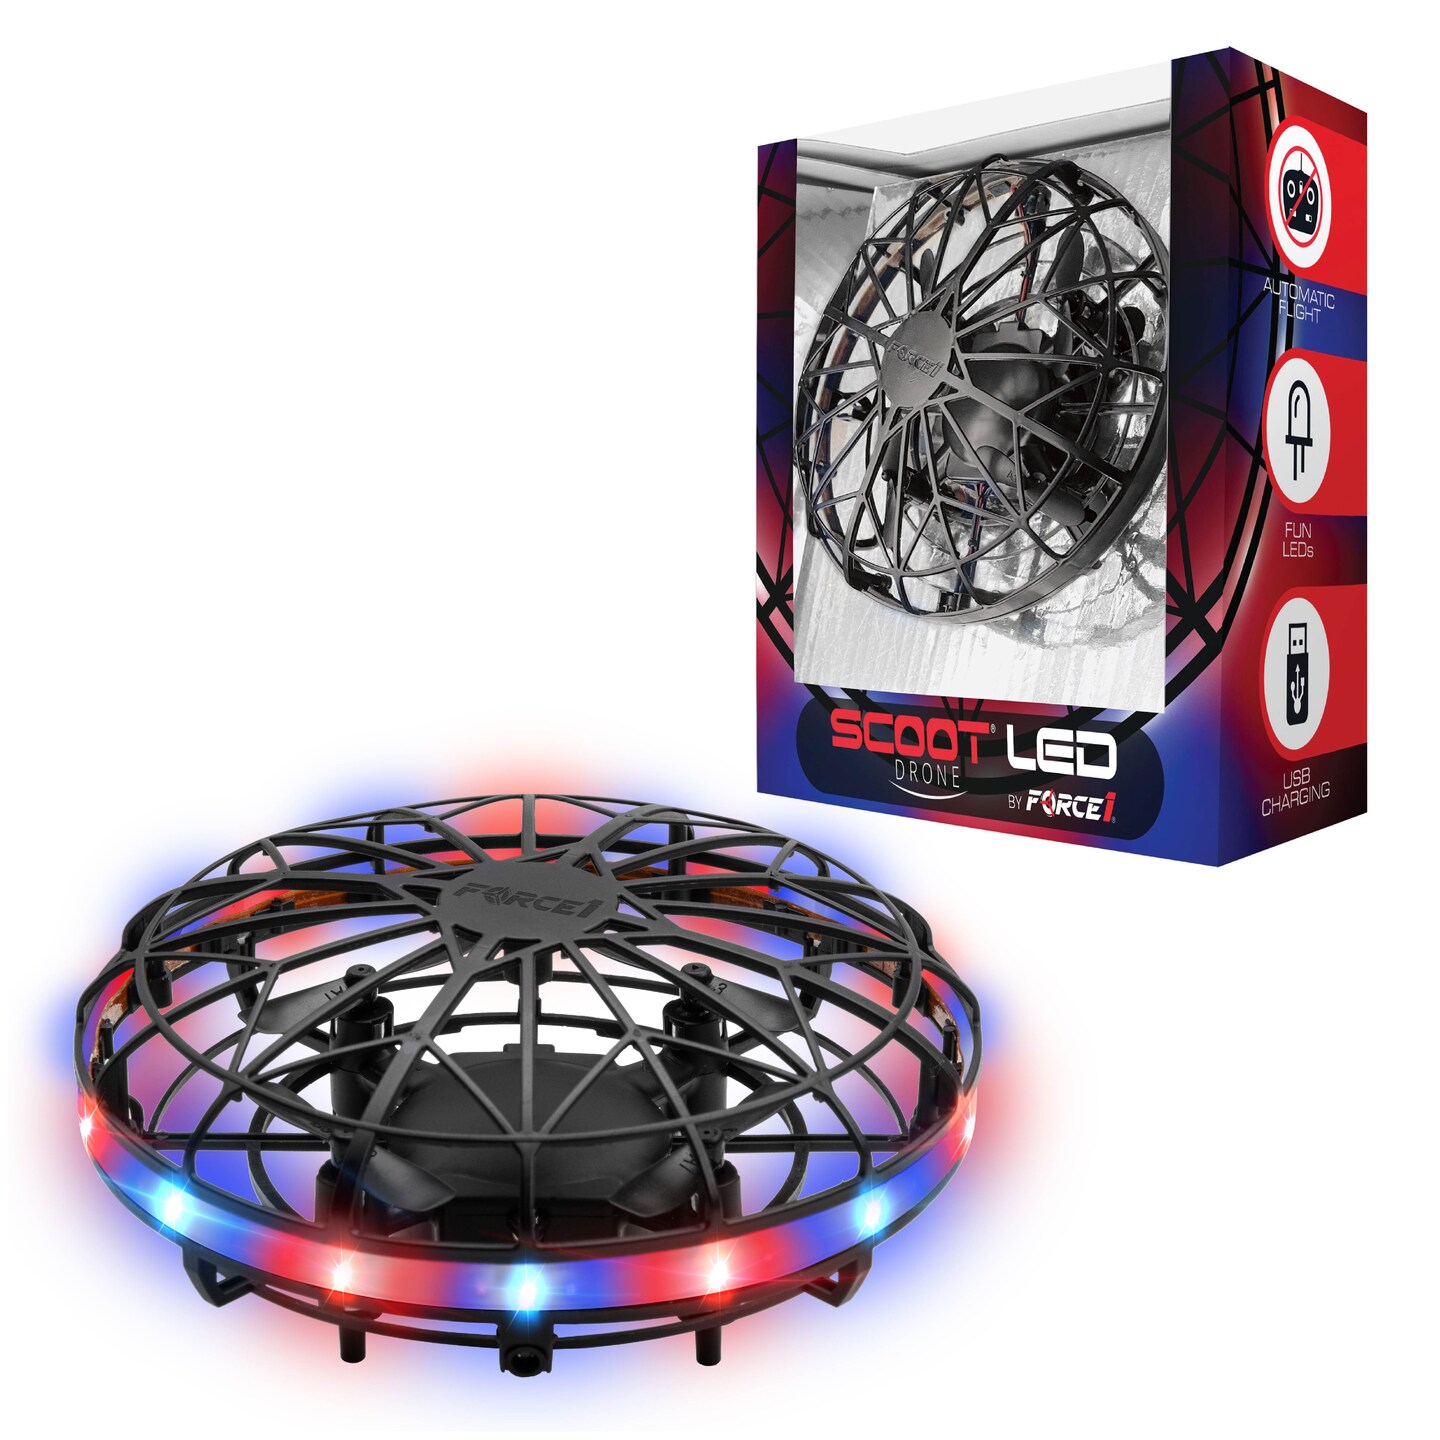 Force1 Scoot LED Hand Operated Drone for Kids or Adults - Red/Blue